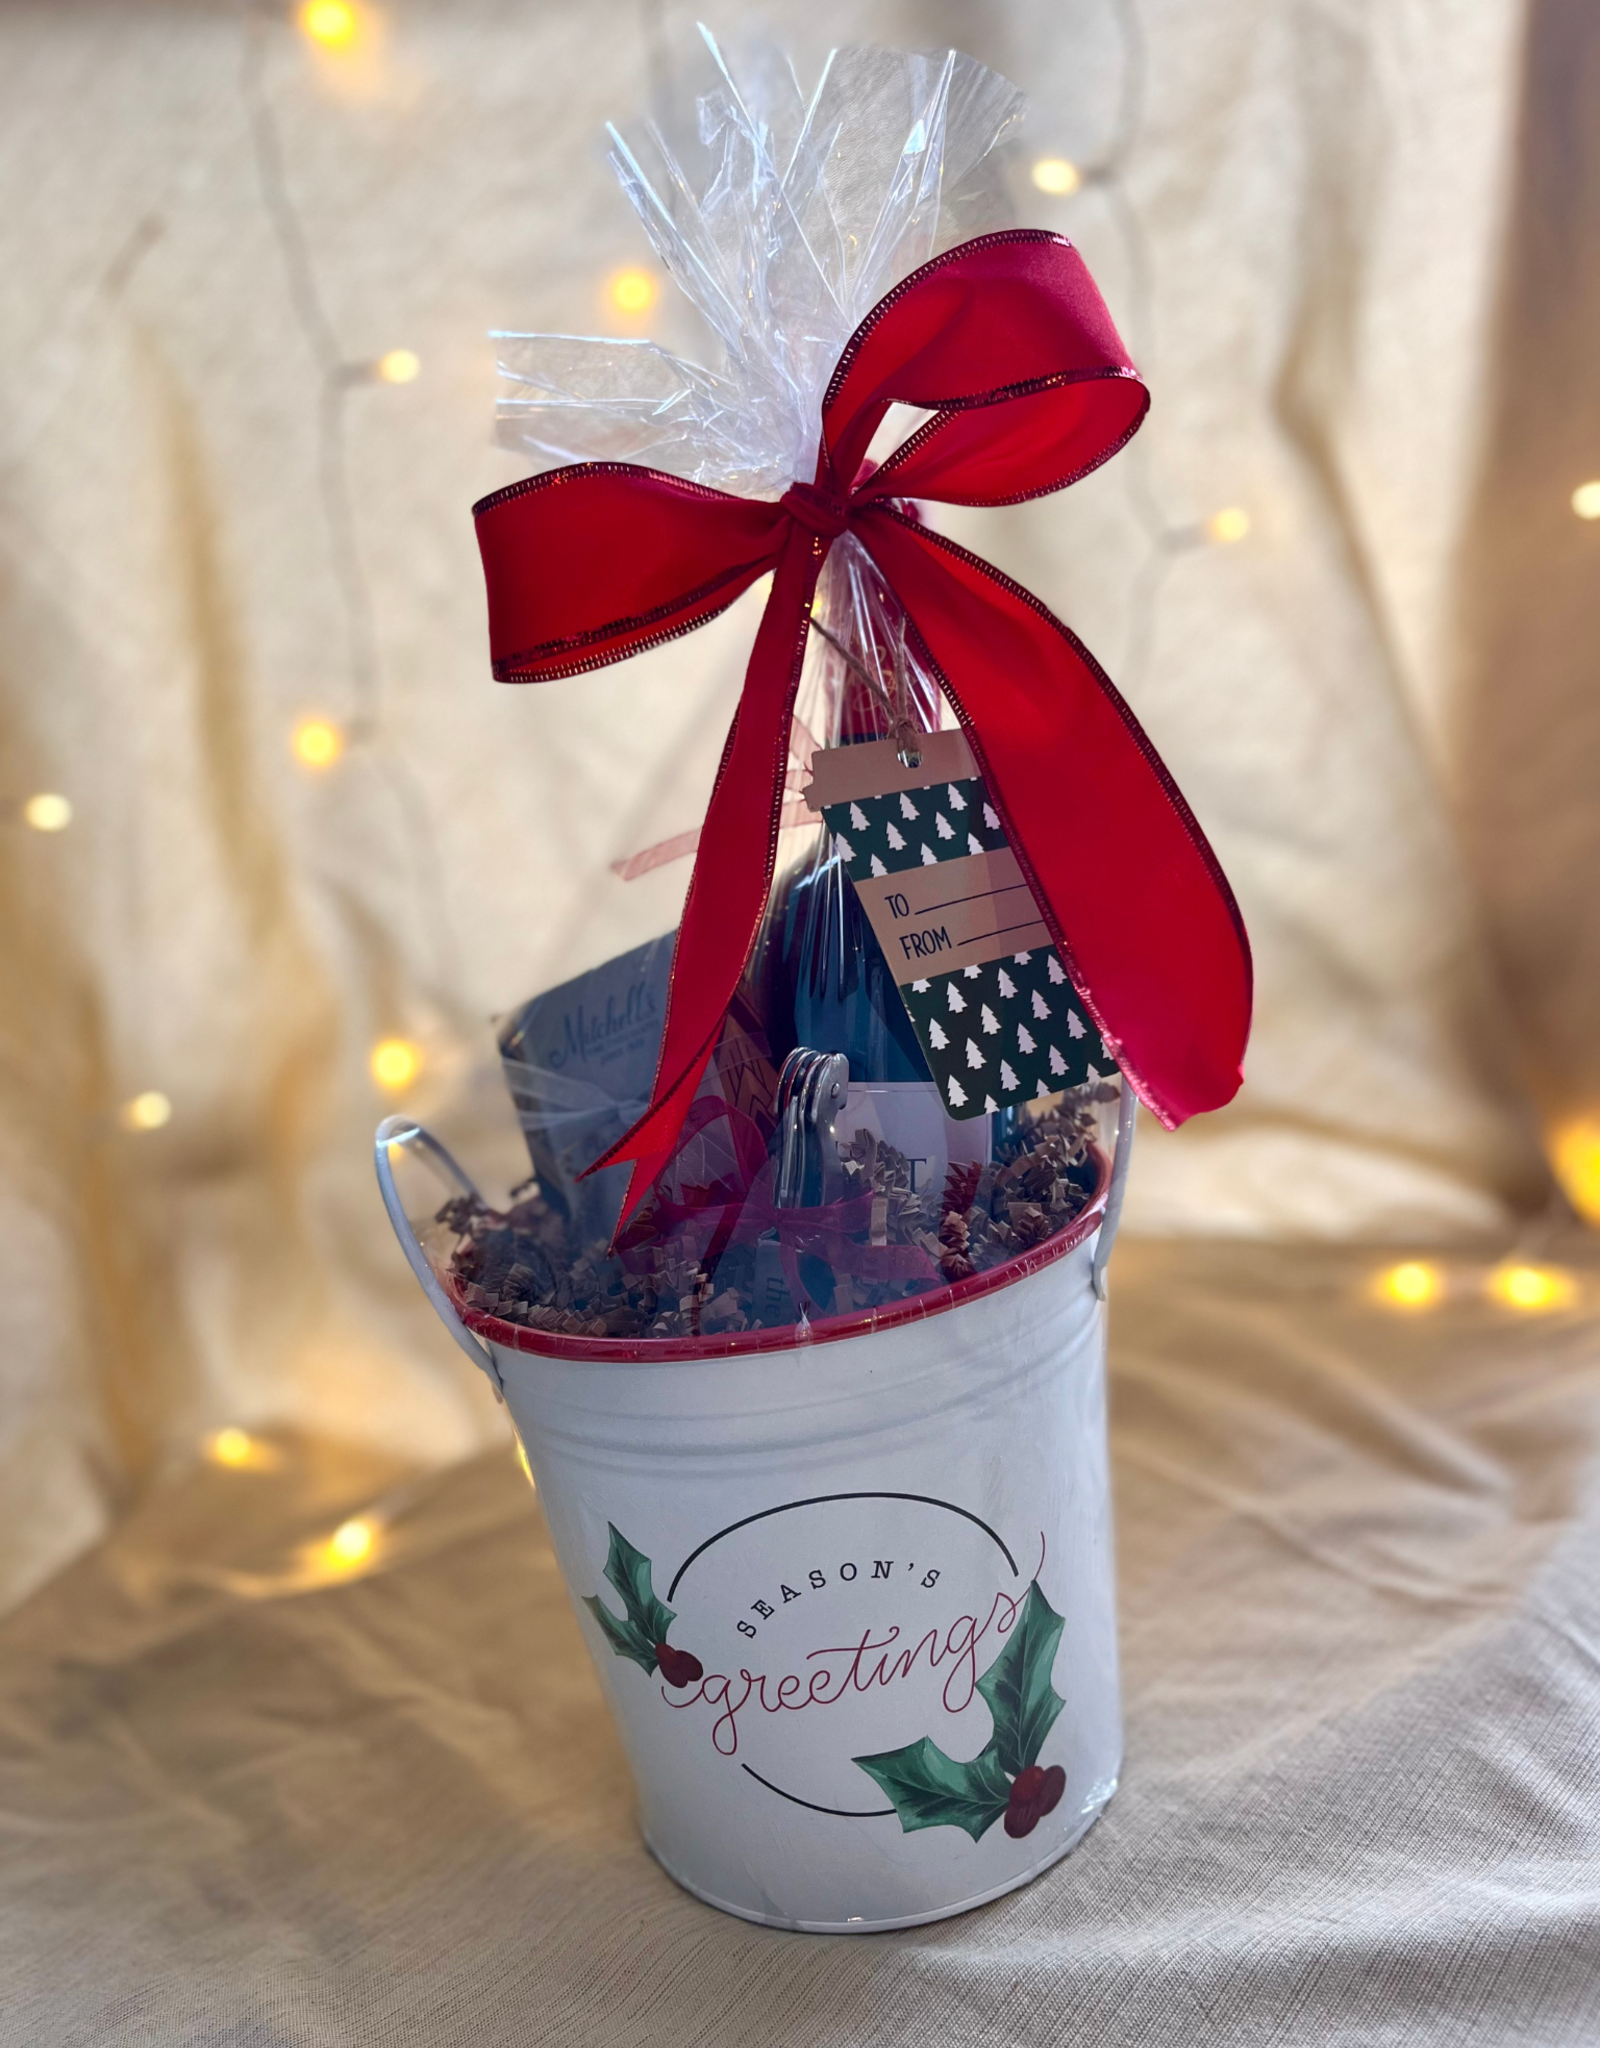 One Bottle Holiday Basket (Red Wine)